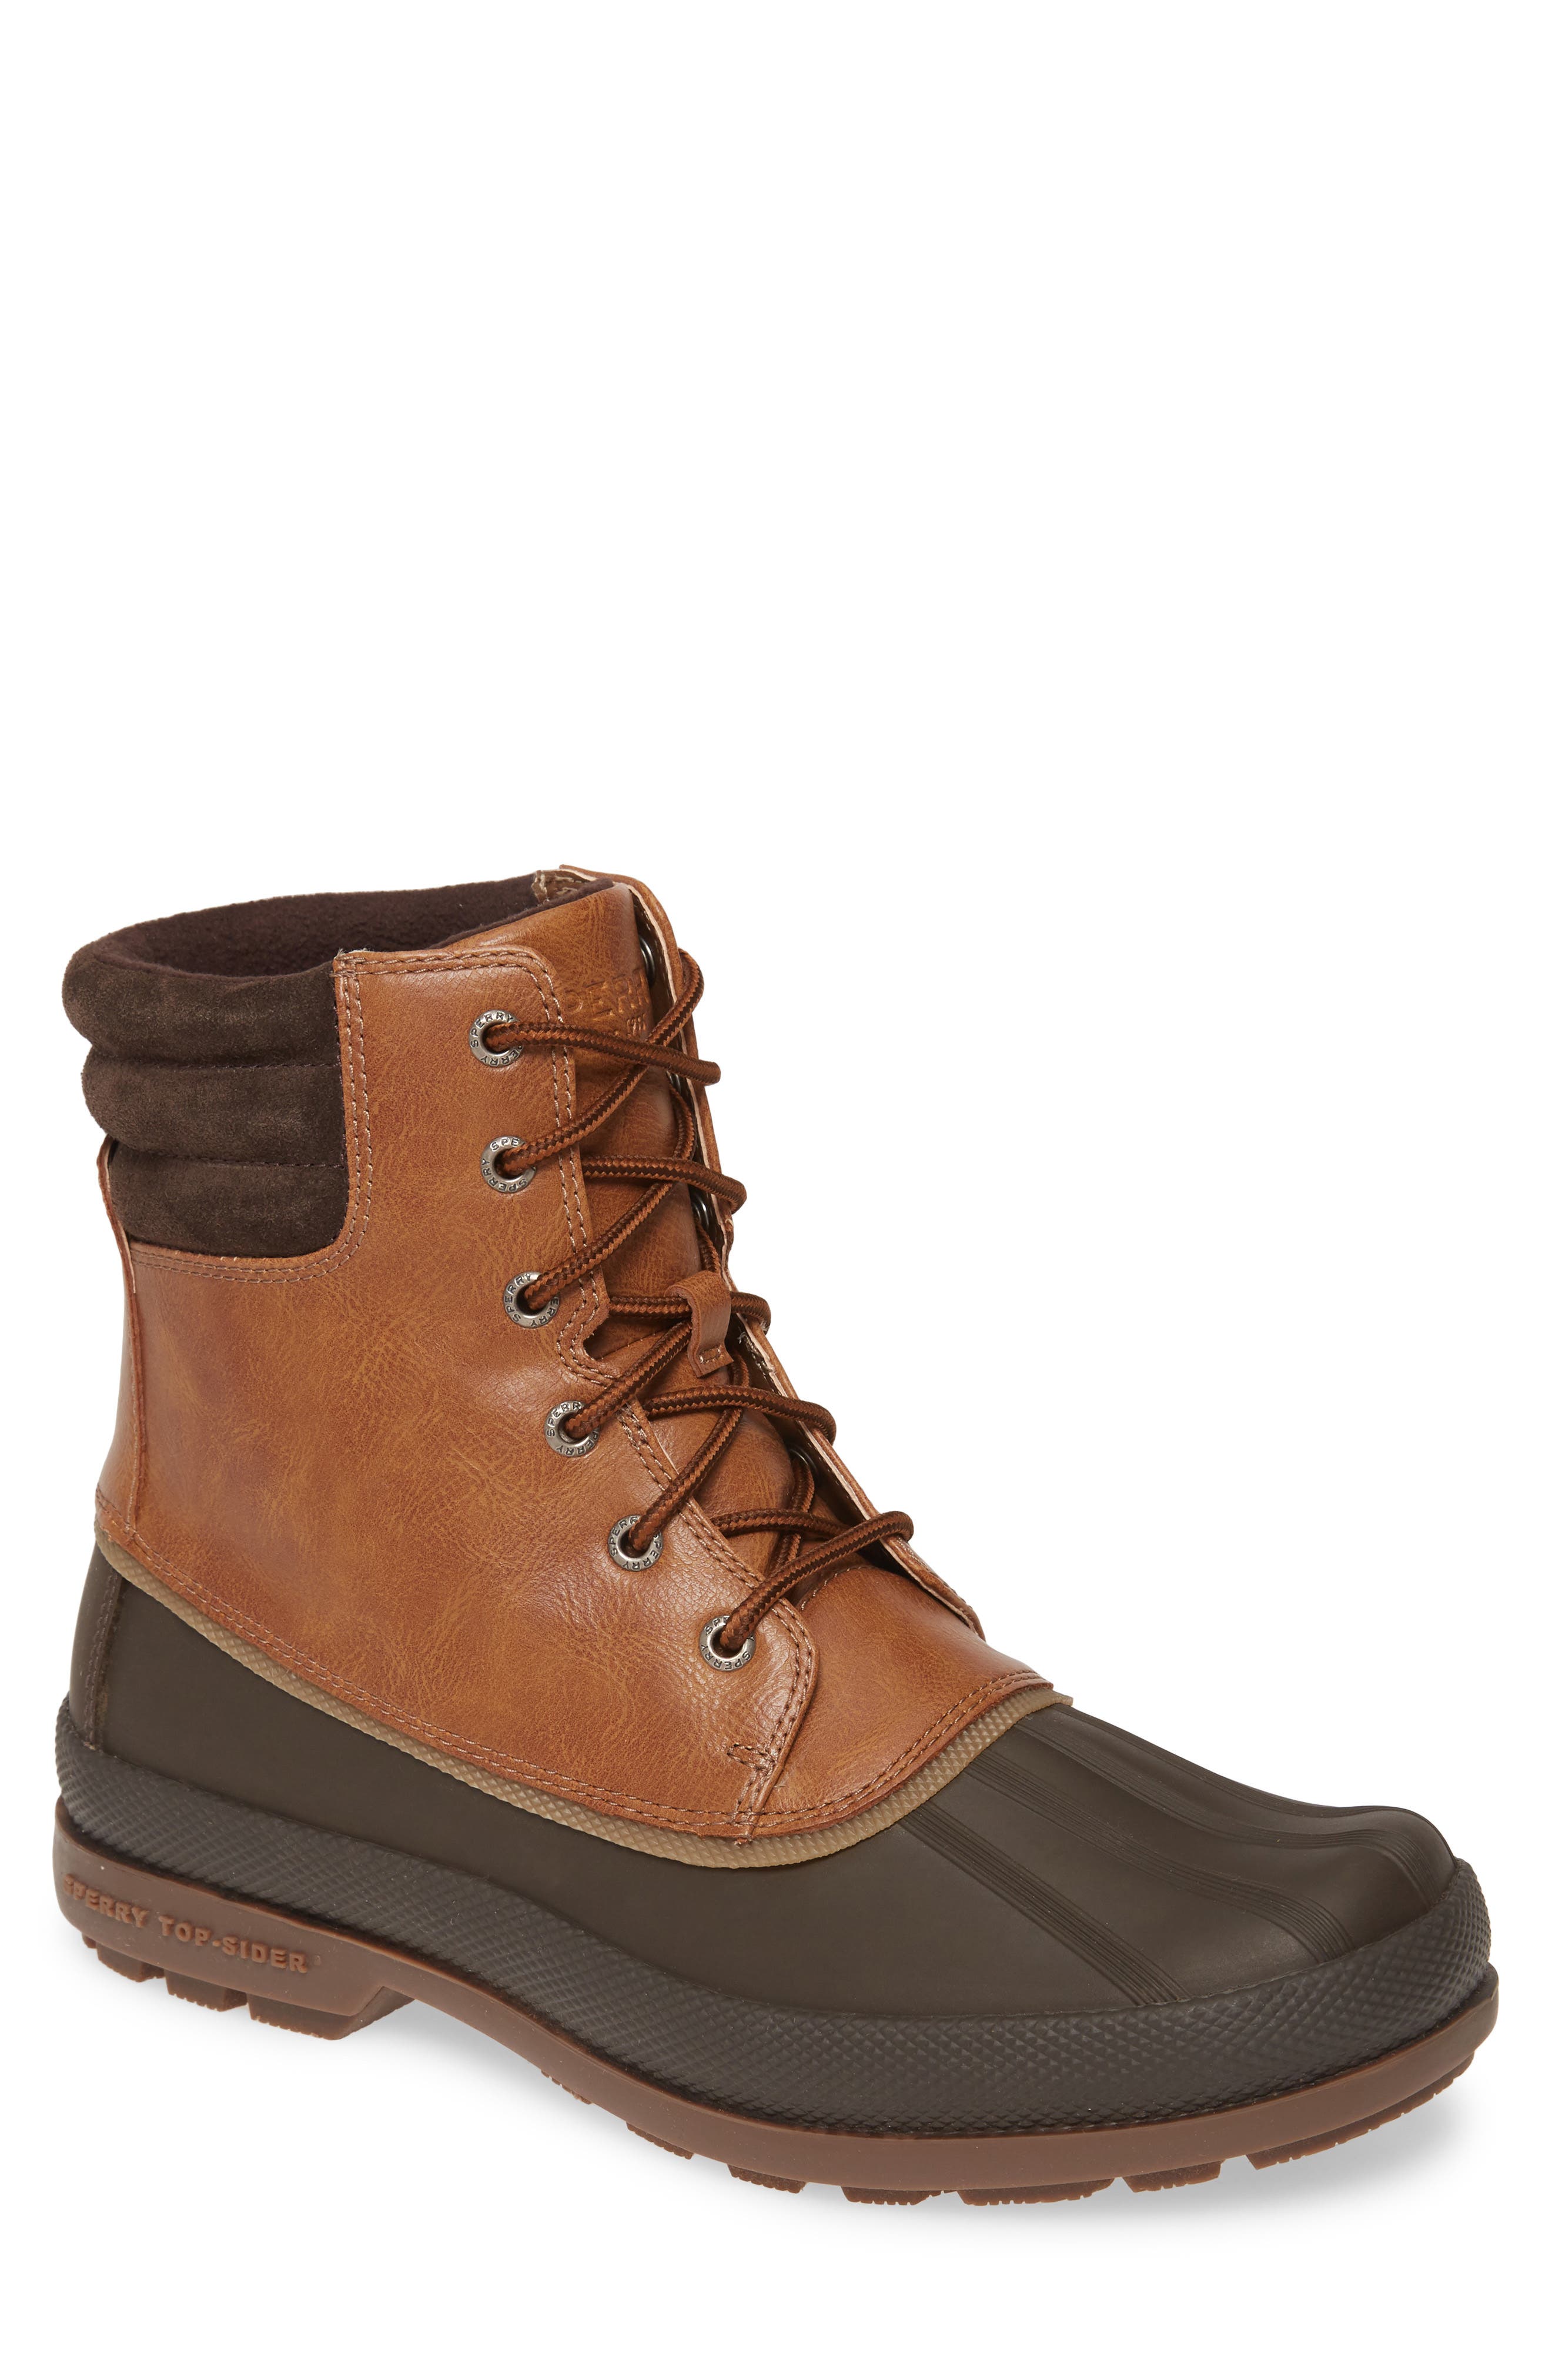 sperry duck boot thinsulate